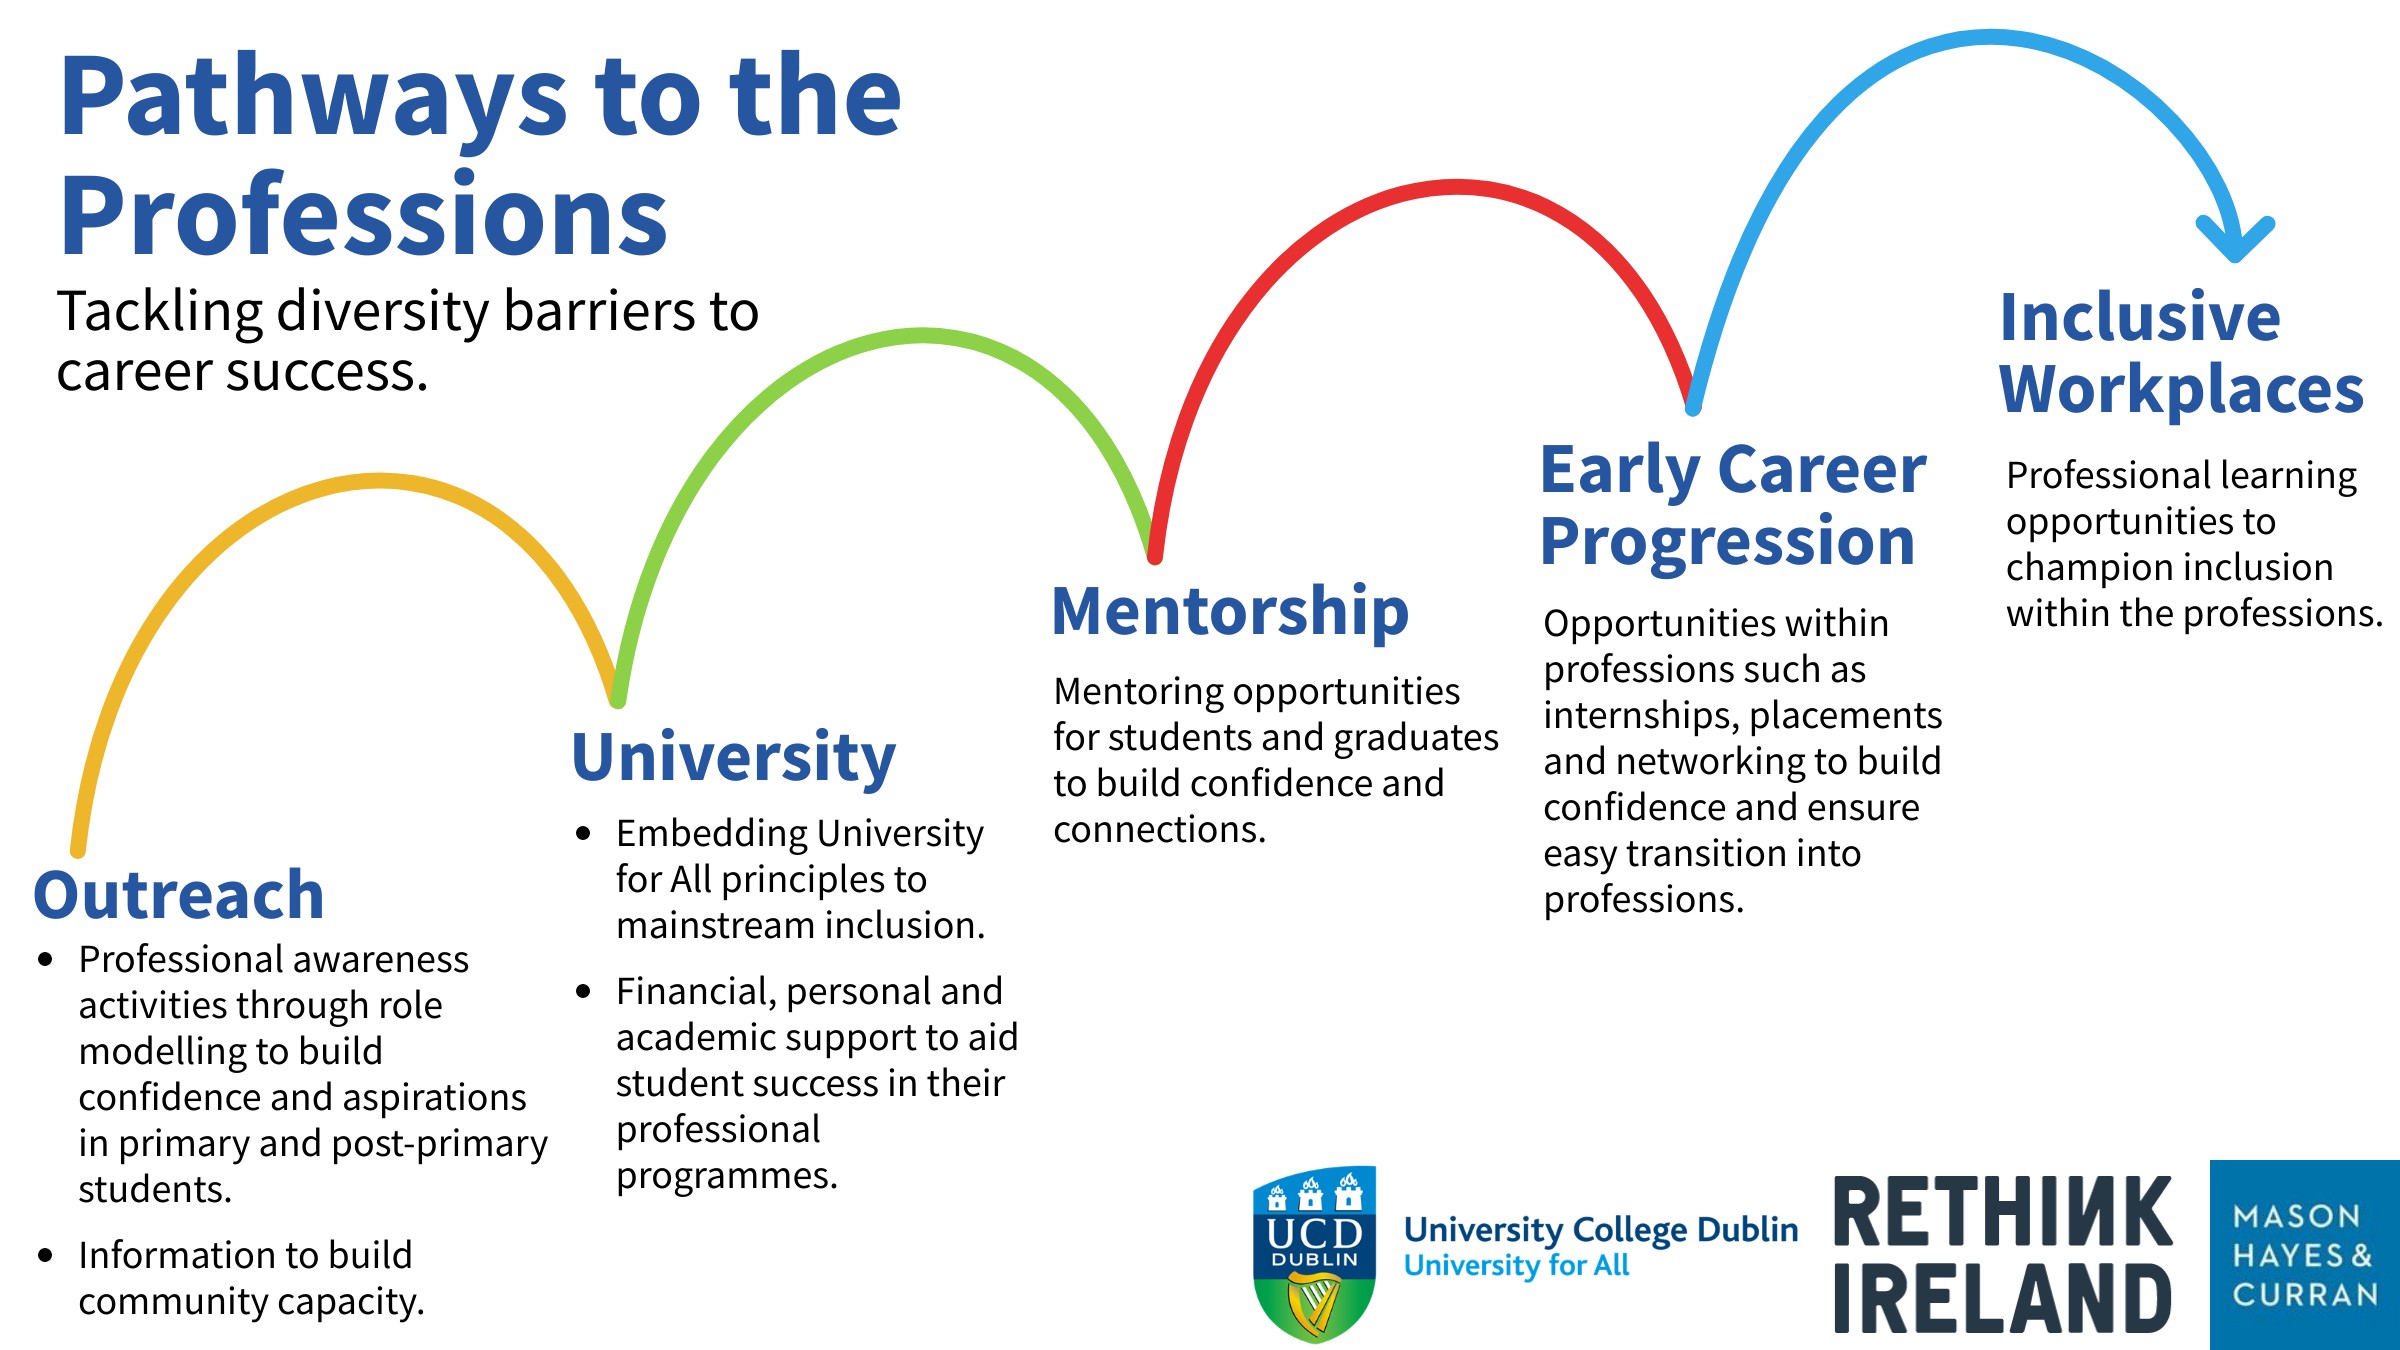 An image depicting the Pathways to Professions featuring 5 steps: Outreach, University, Mentorship, Early Career Progression and Inclusive Workplaces.